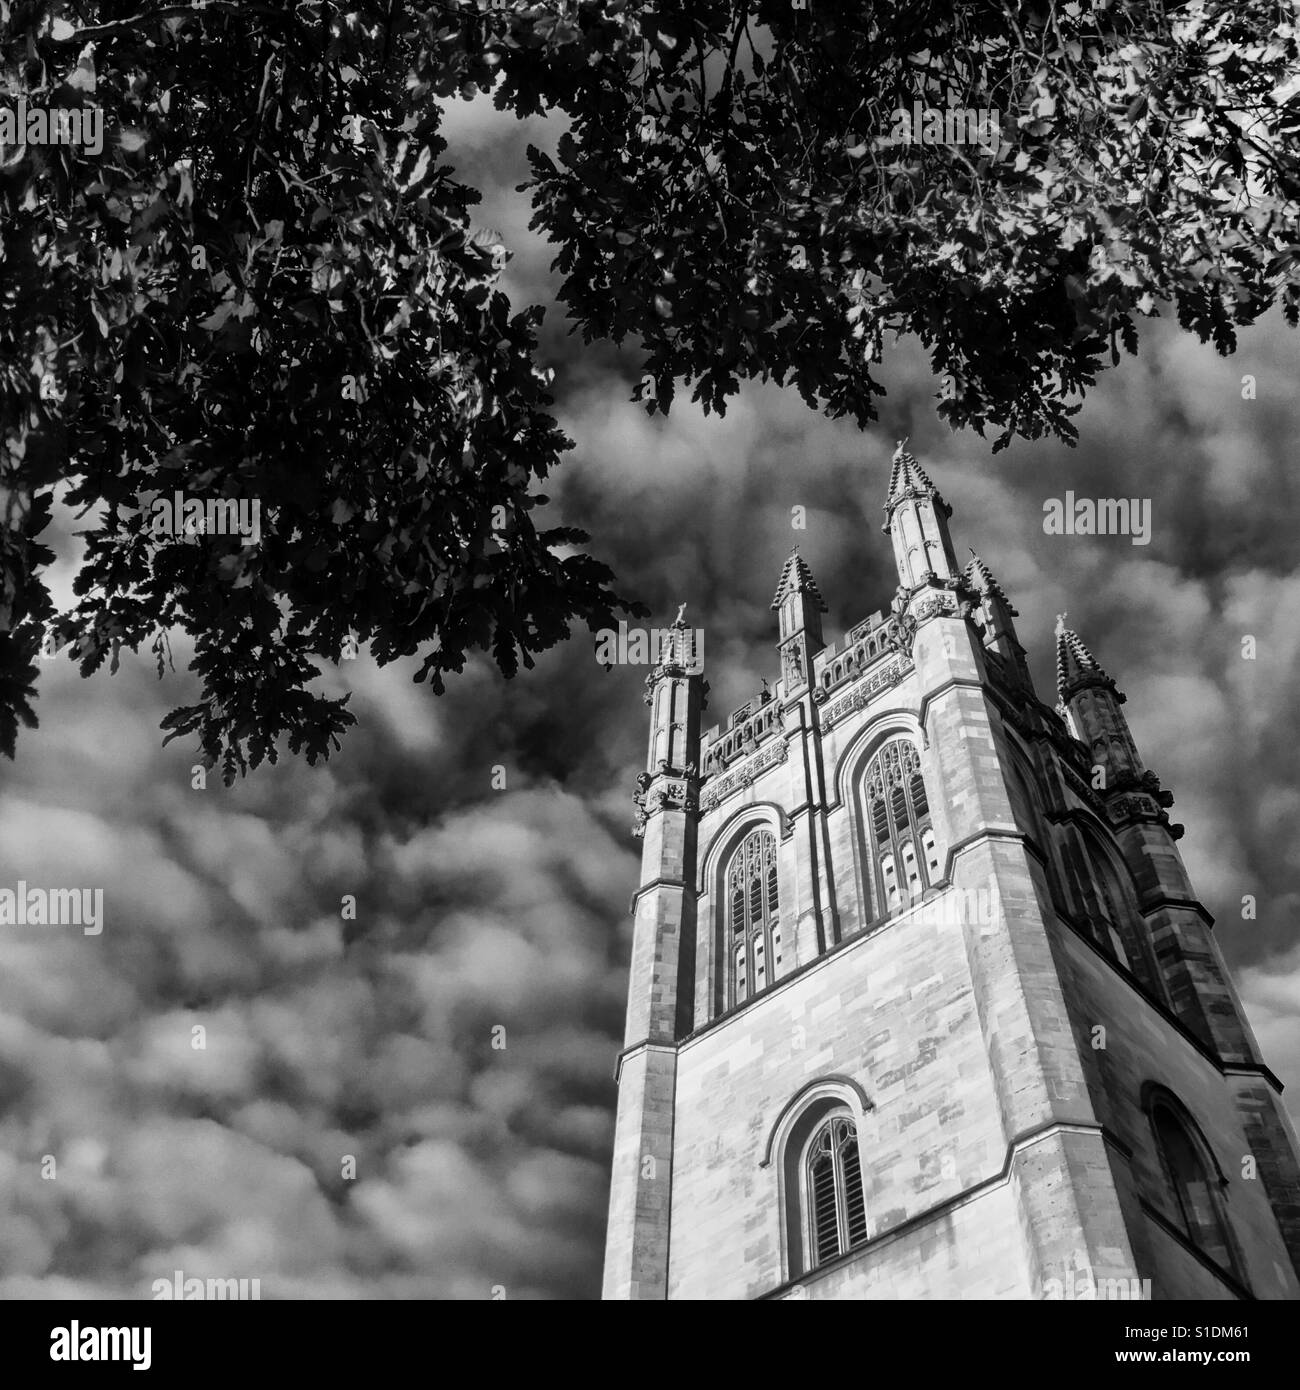 Magdalen College Tower on Oxford's High Street Stock Photo